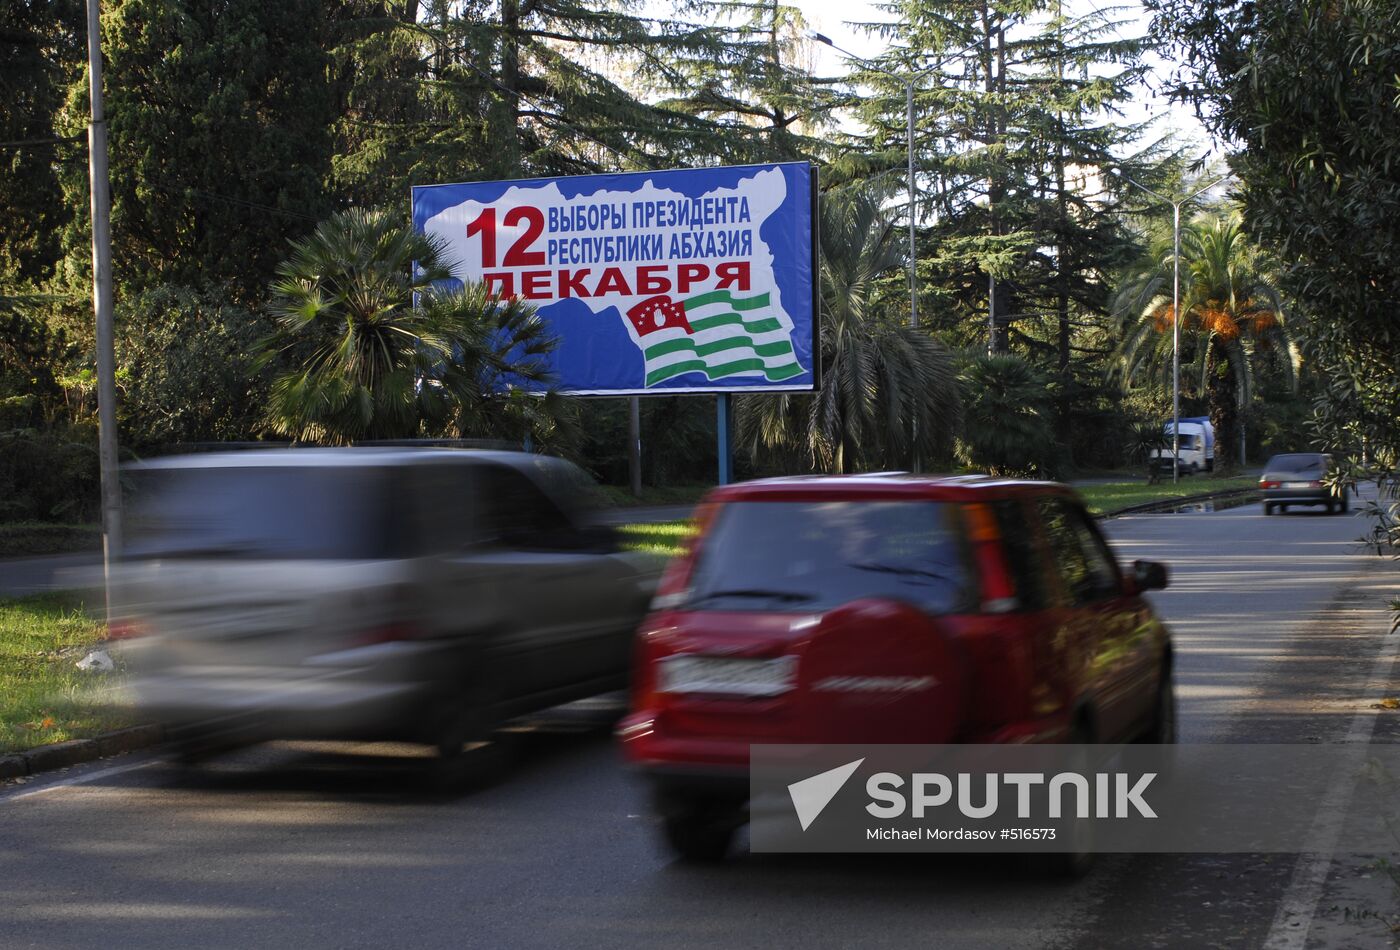 Presidential election campaign in Abkhazia